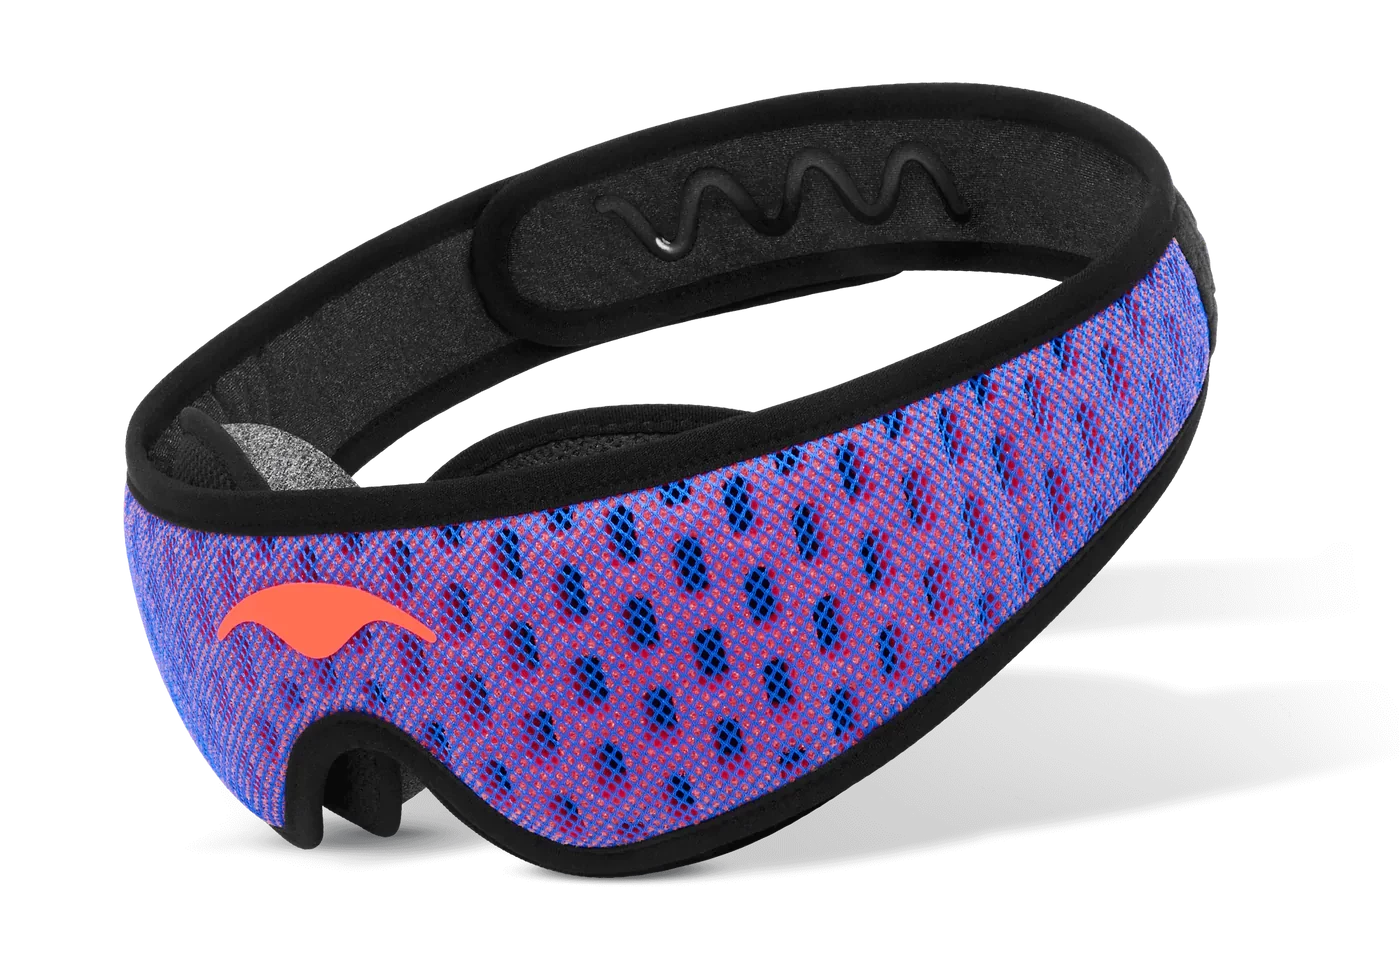 A blue mesh sleep mask for night shift workers who sleep on their sides.